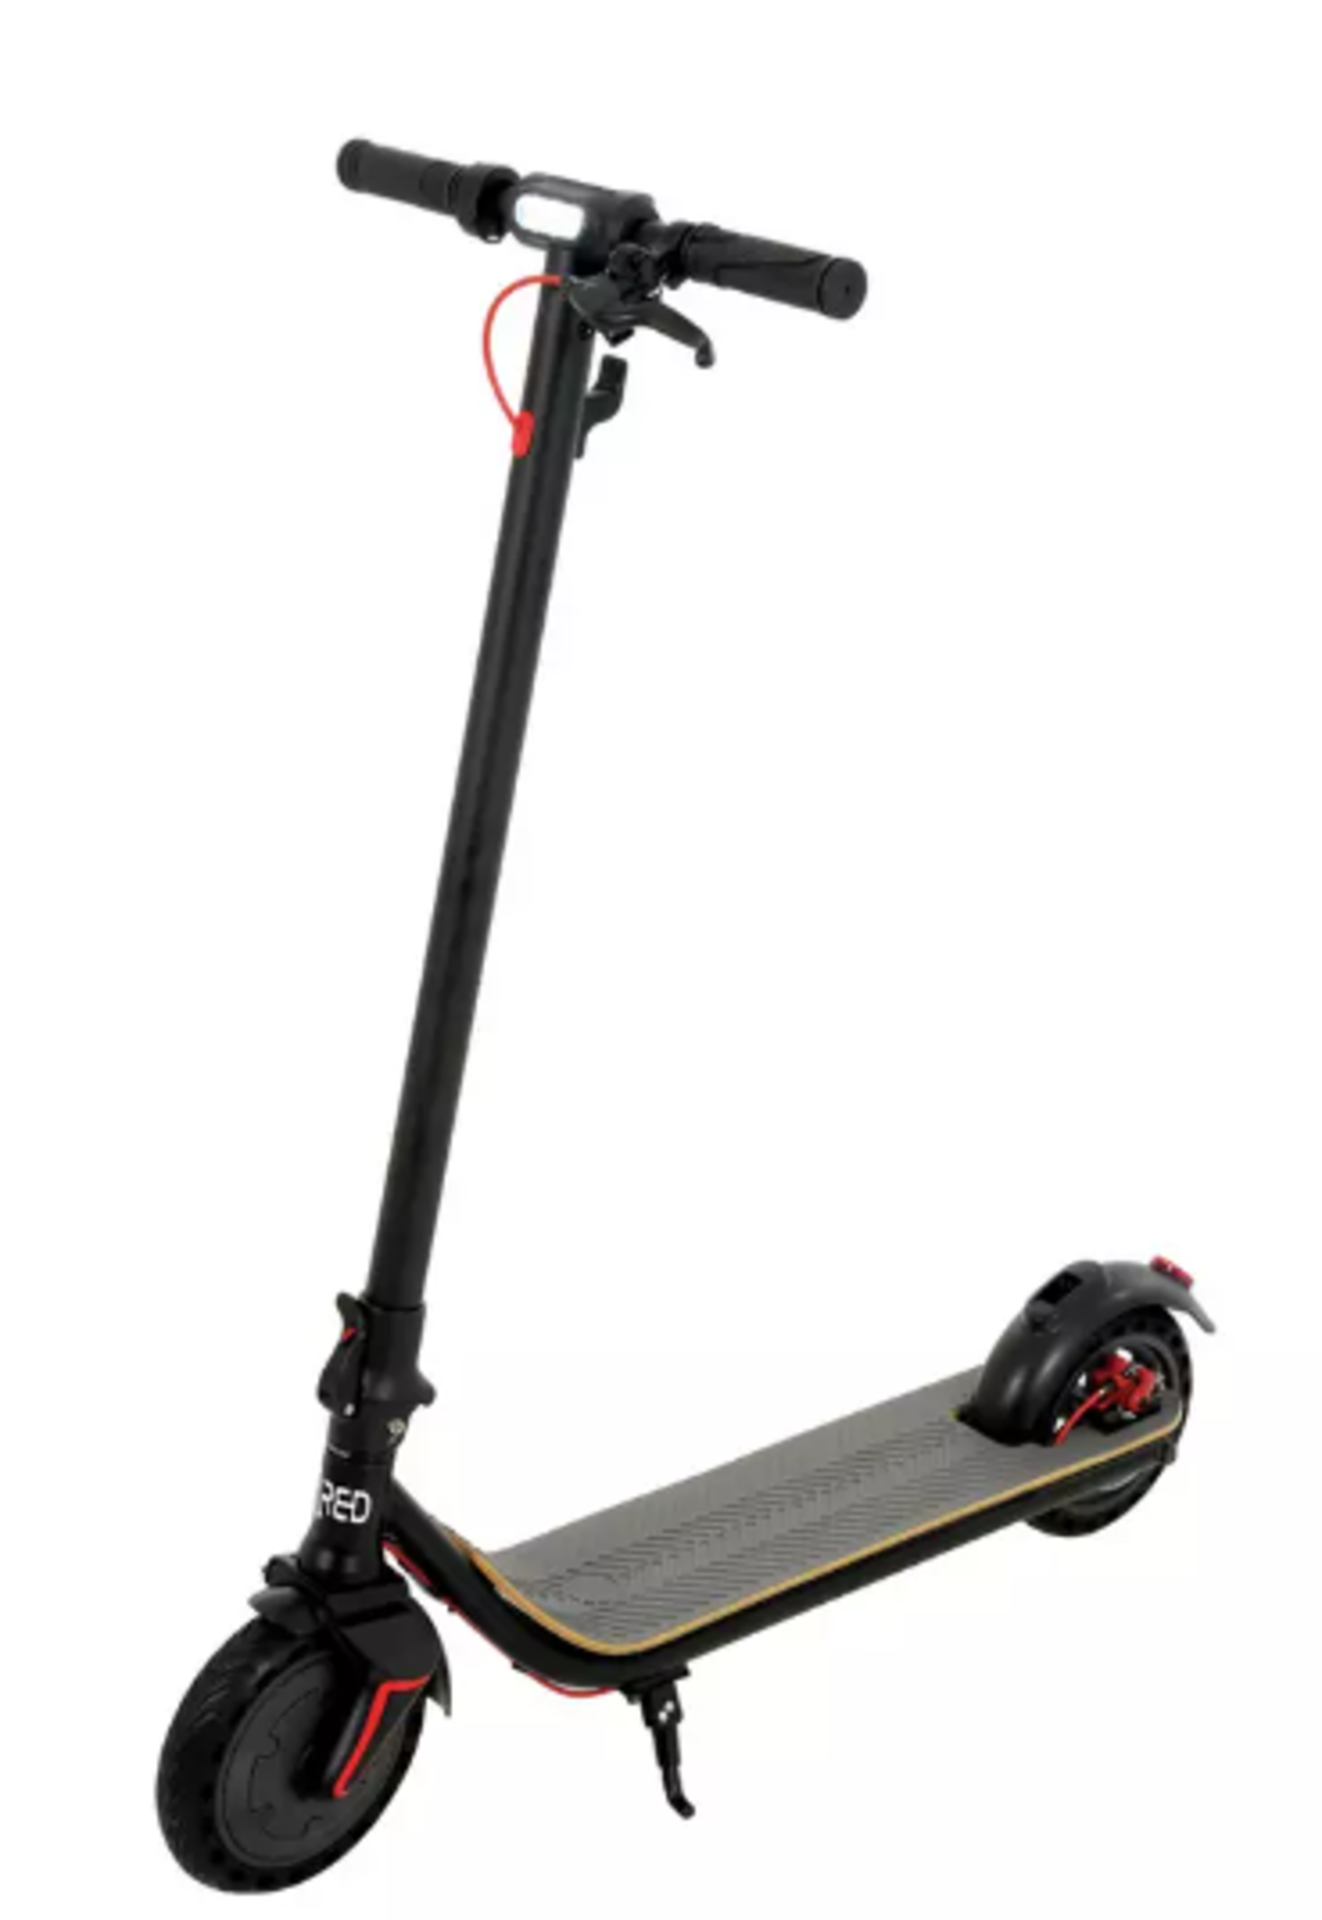 Wired 350 HC Electric Scooter. RRP £500.00. The impressively powerful 350W motor fitted to the WIRED